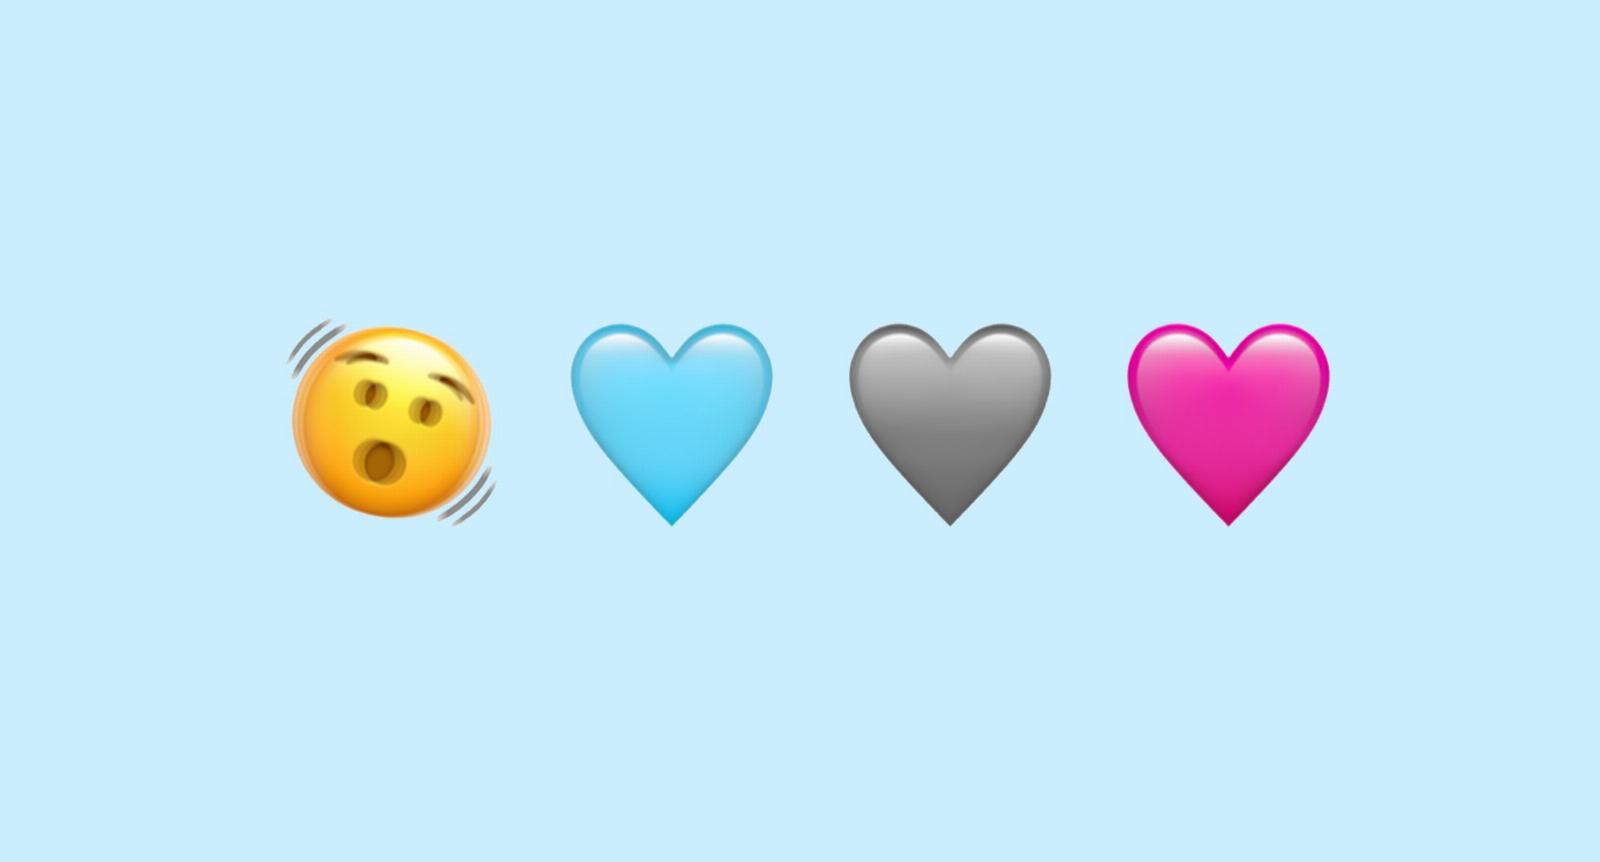 iOS gains new emoji, Showtime joins a pricier Paramount+, and Instagram launches Channels